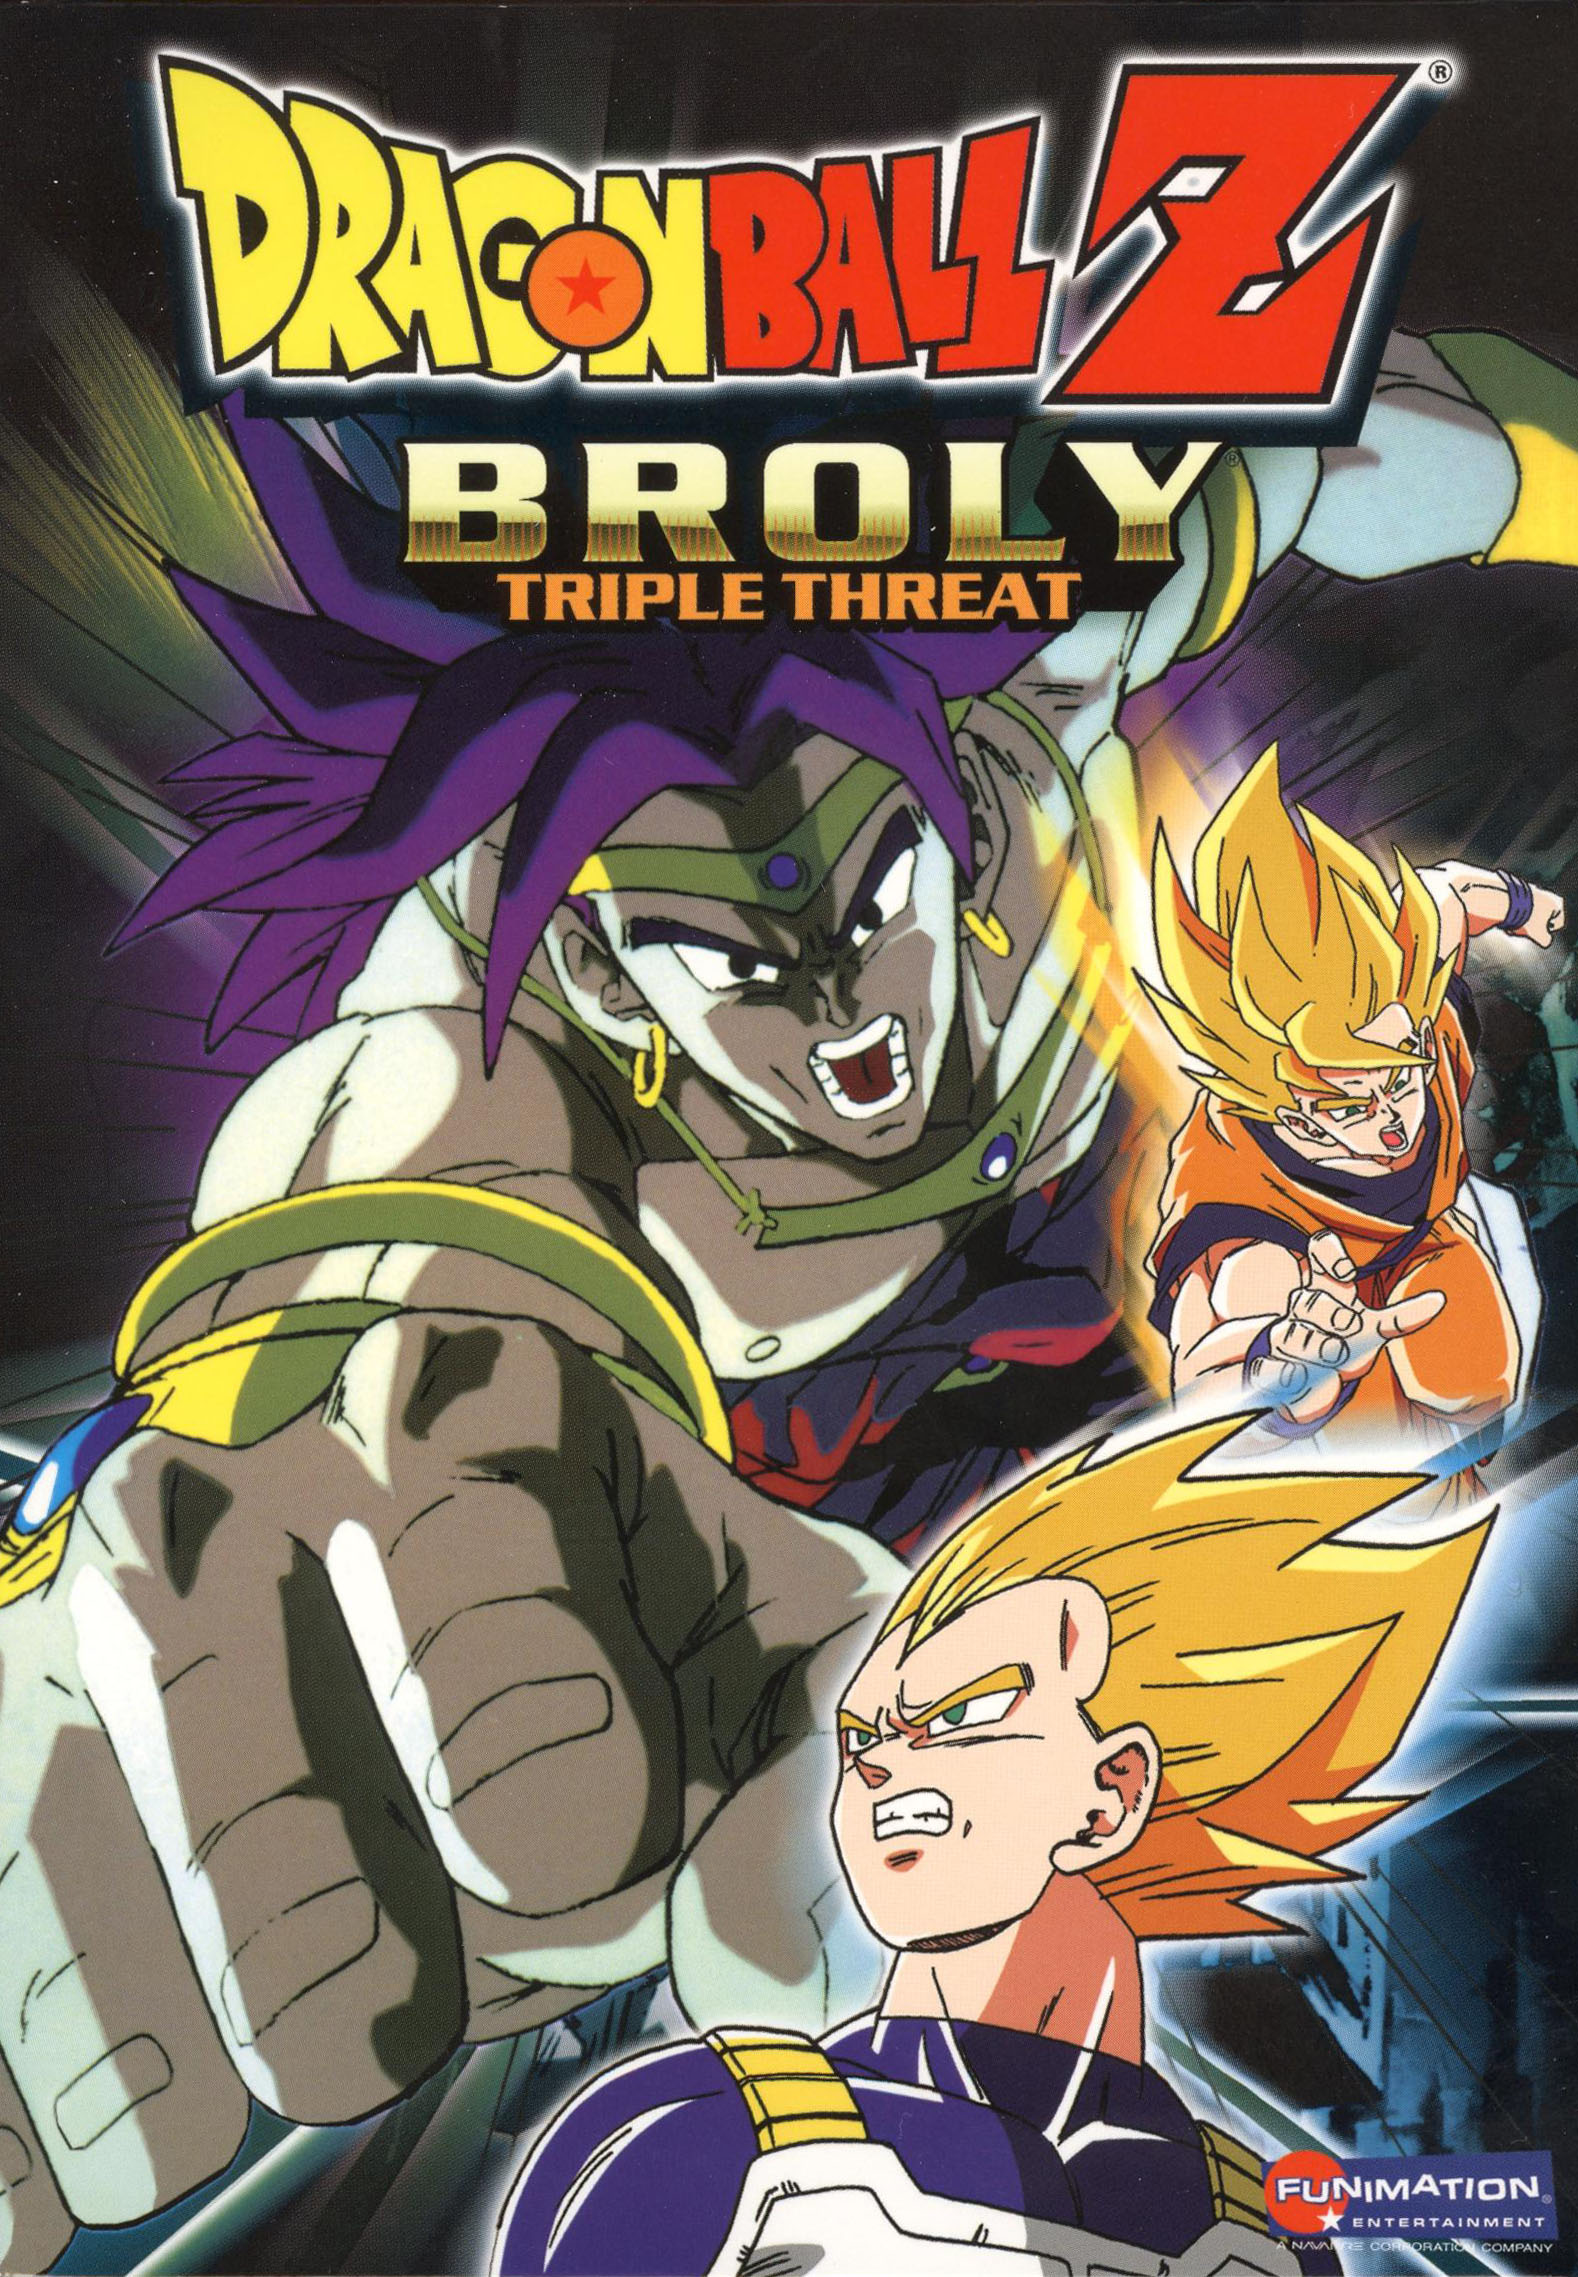 Dragon Ball Super The Movie: Broly Anime DVD English Dubbed Free Shipping